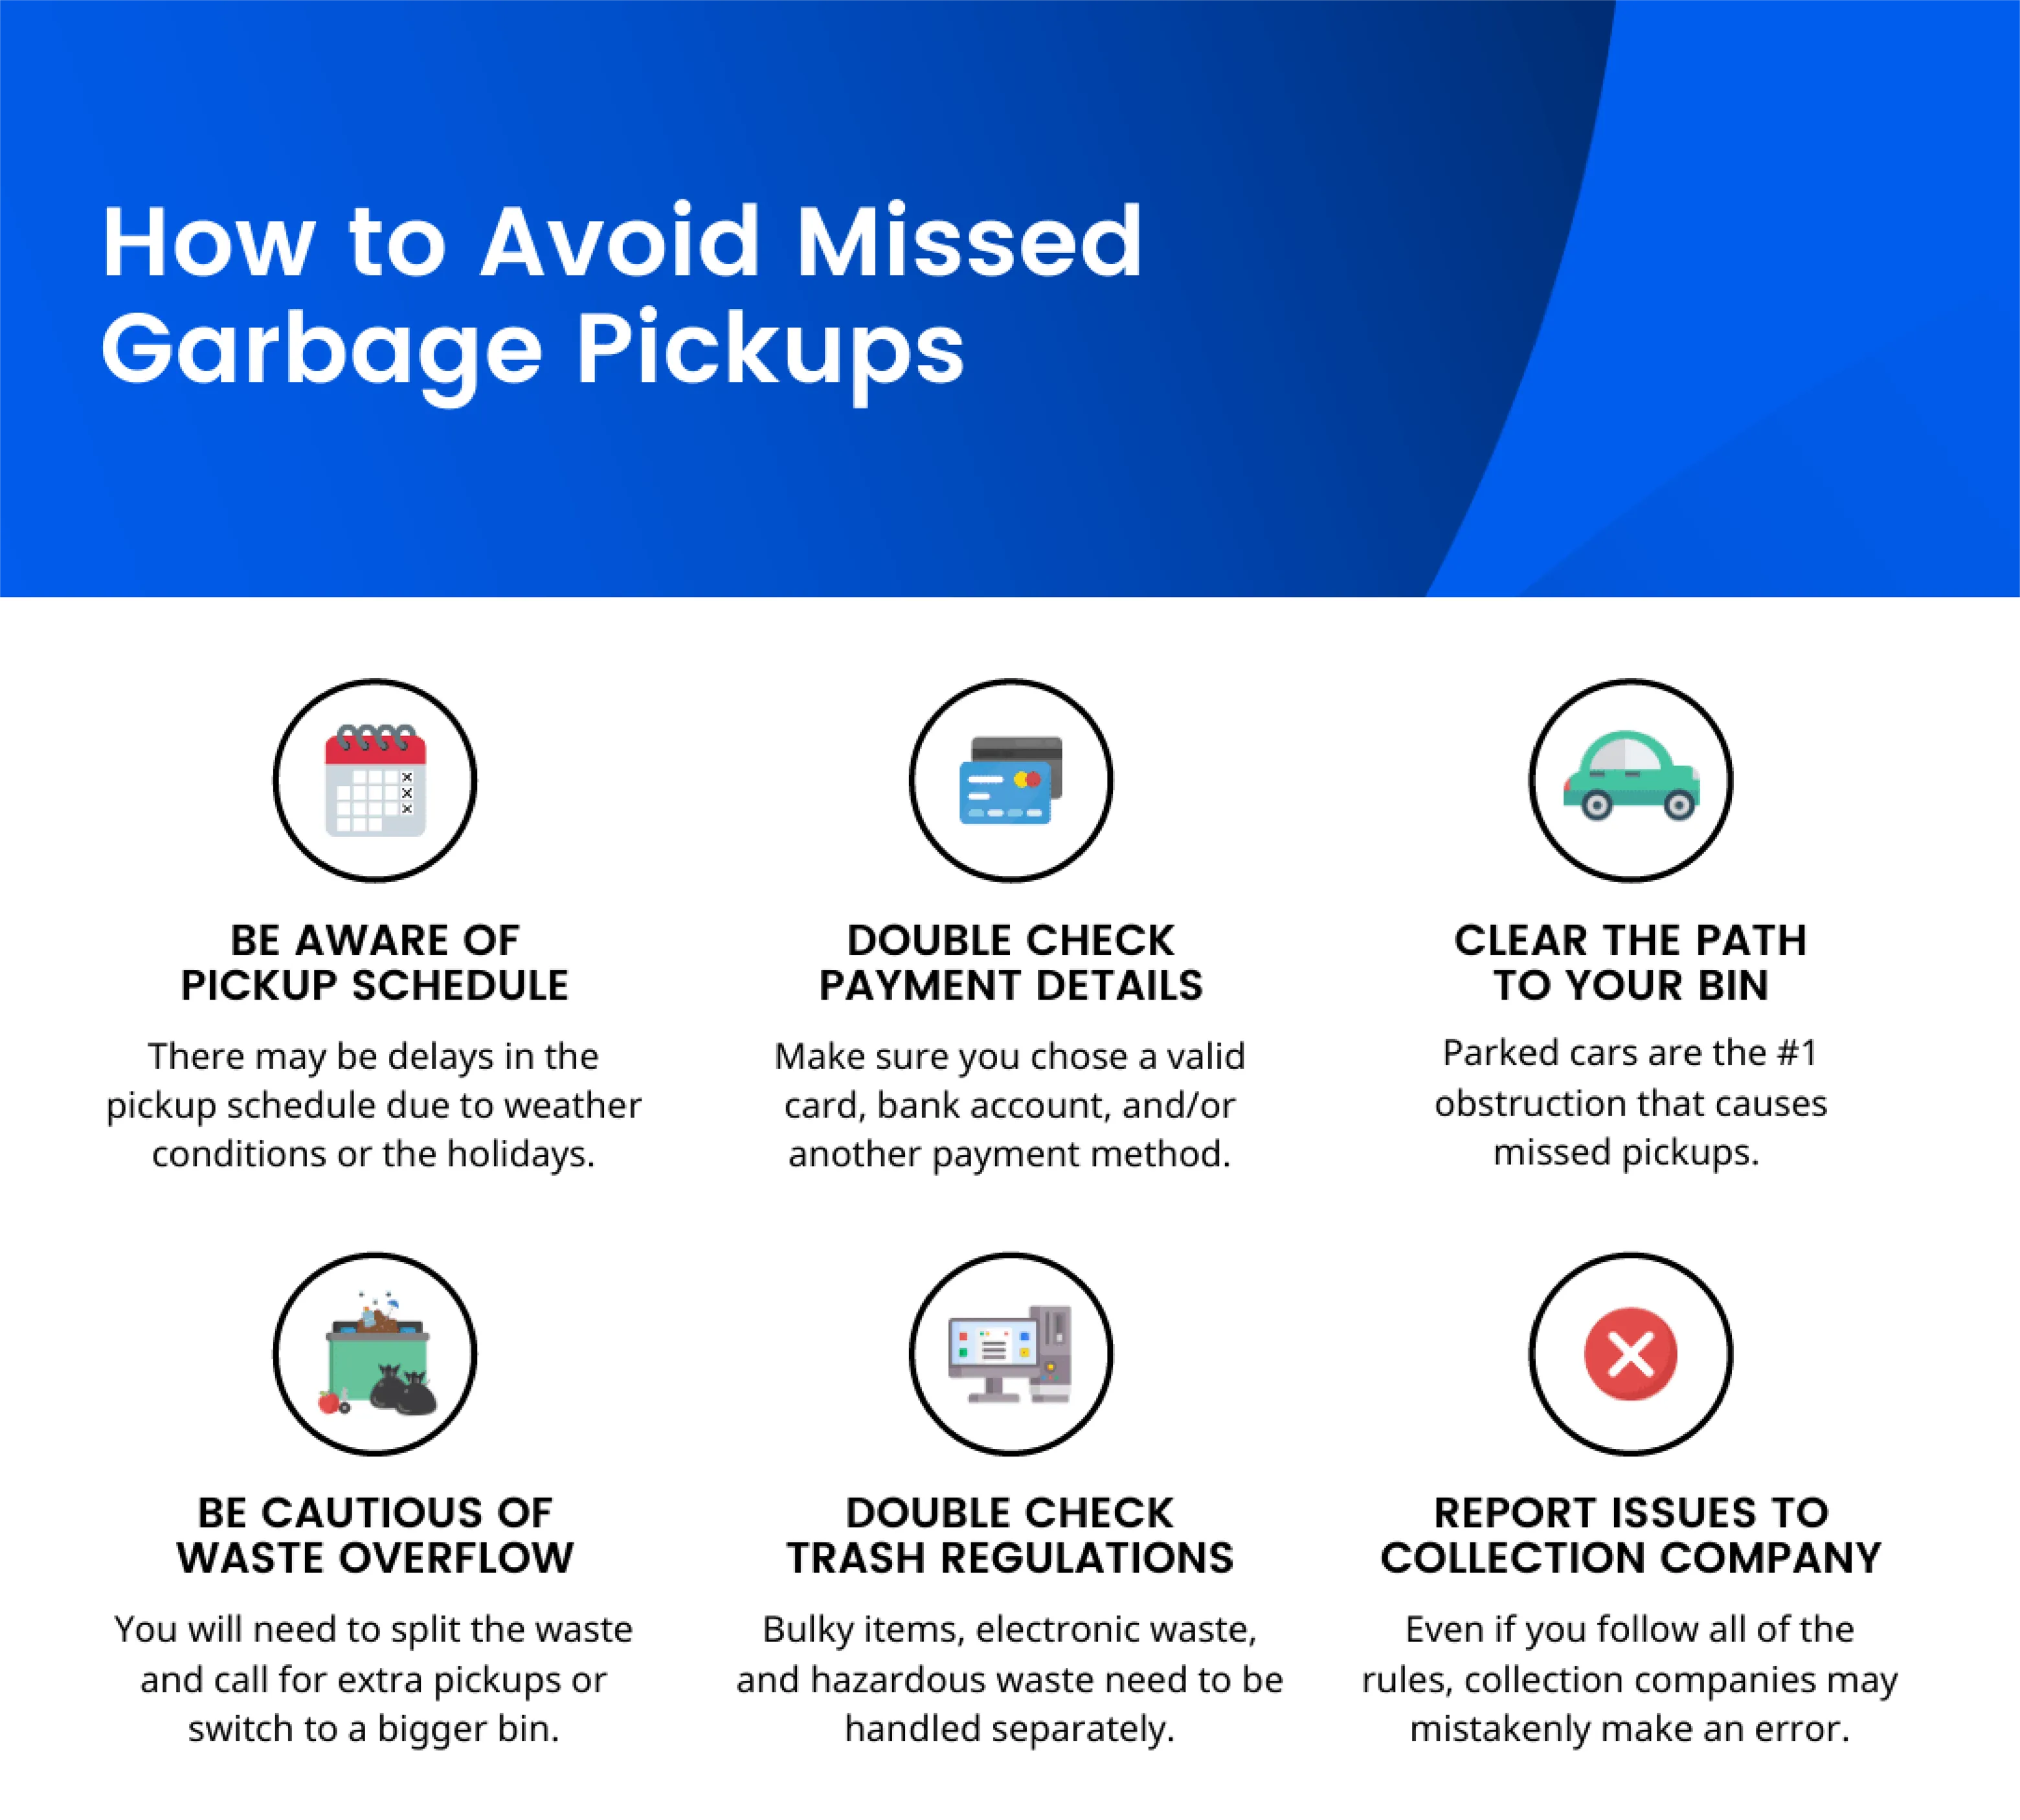 Why do missed trash pickups happen and what can we do?